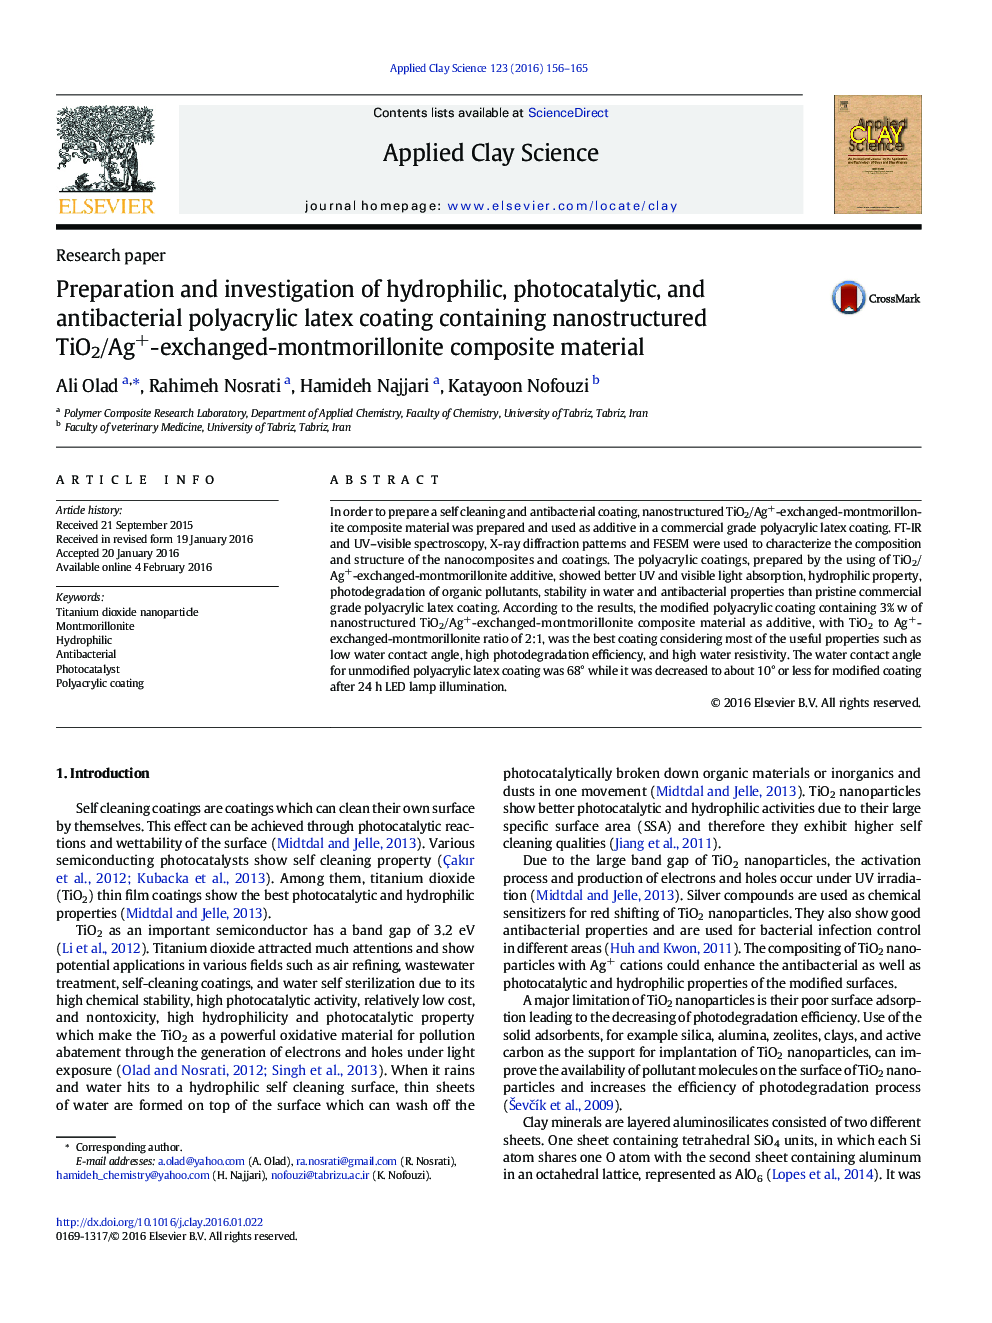 Preparation and investigation of hydrophilic, photocatalytic, and antibacterial polyacrylic latex coating containing nanostructured TiO2/Ag+-exchanged-montmorillonite composite material